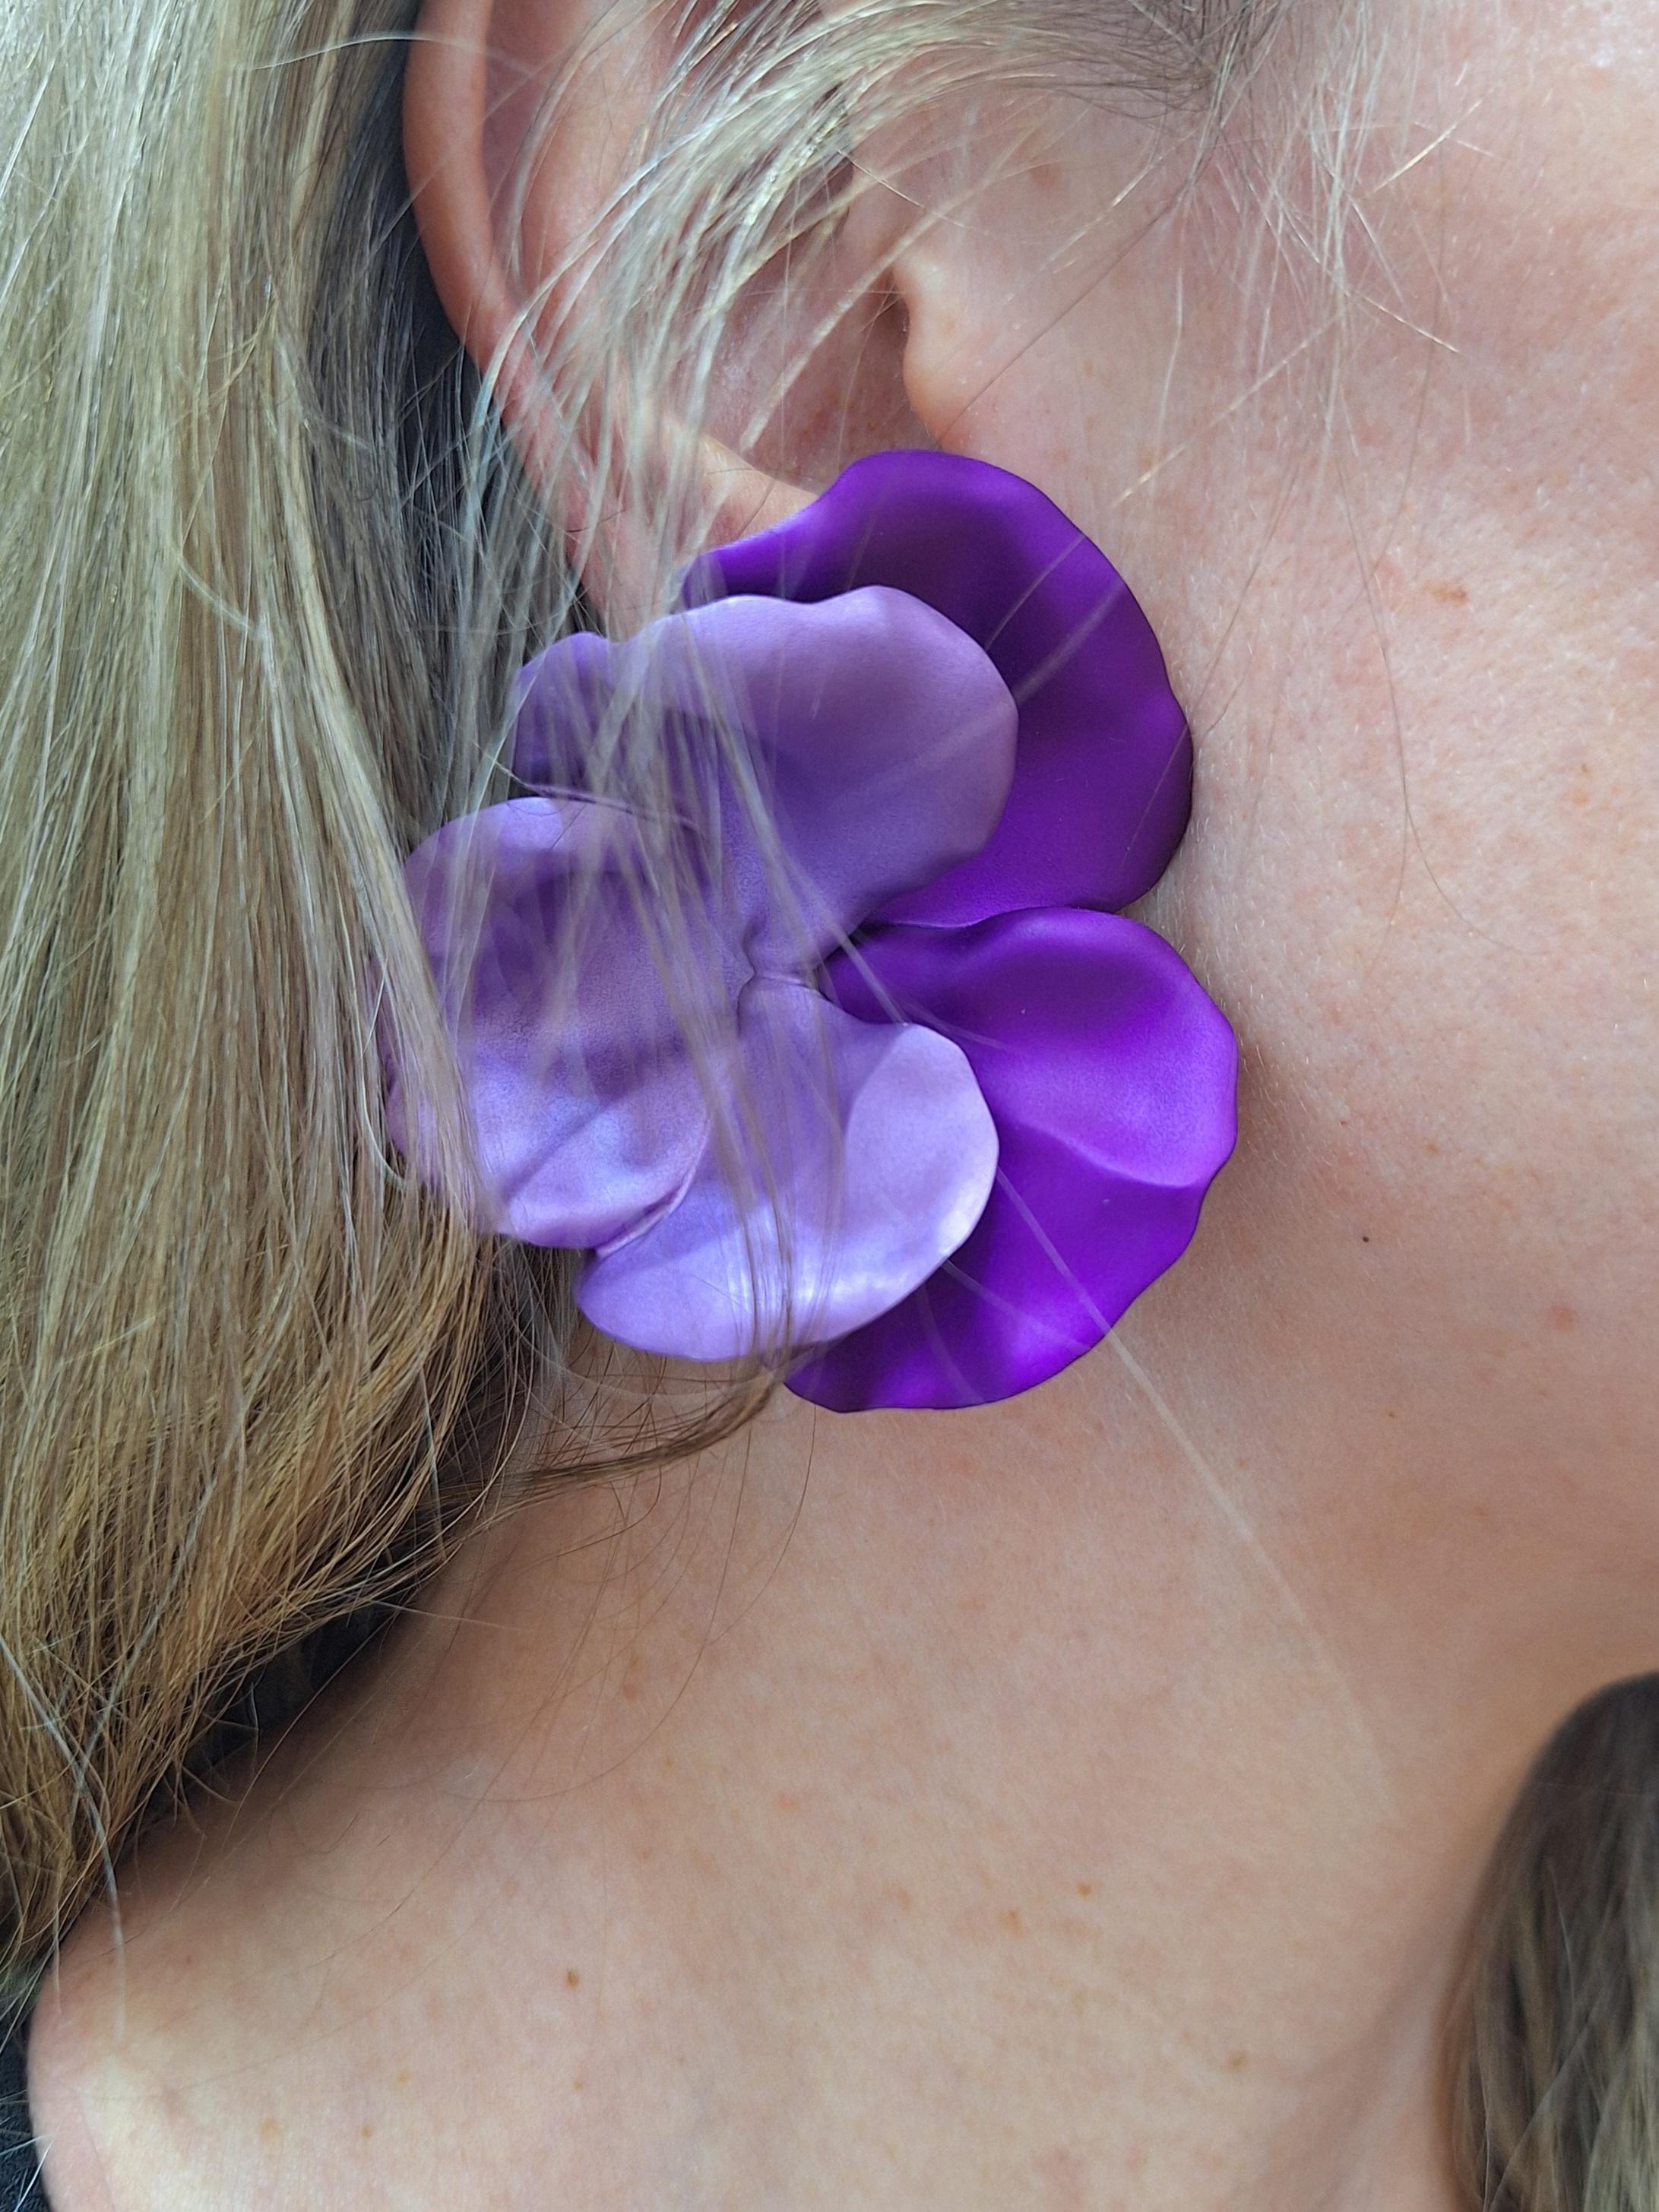 Jar Paris Big Purple Pansies Earrings 

Designed as a sculpted pansy flowerhead earrings with two shades of purple petals.

Crafted in aluminum and 18k gold for the clip backs. 

Signed Jar Paris and numbered.

With French hallmark and makers mark.